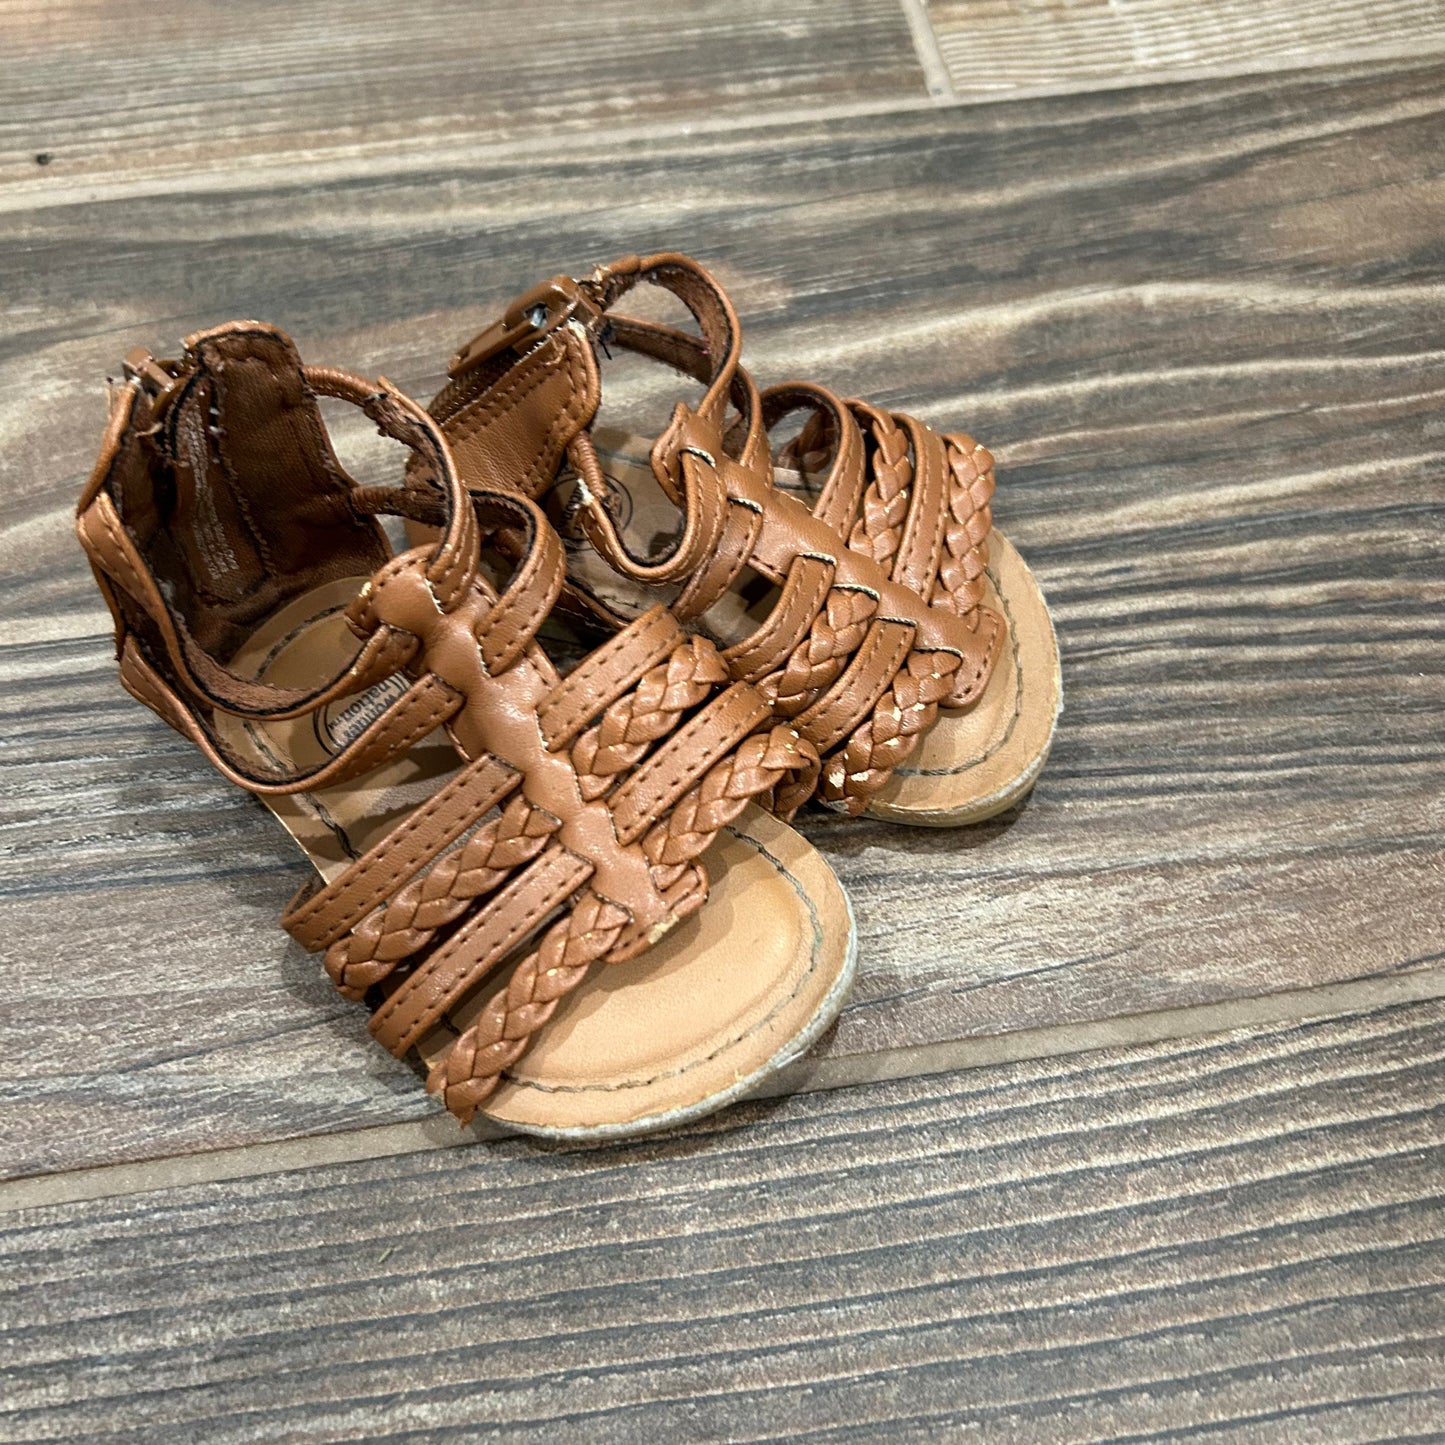 Size 3 (Infant) Wonder Nation Brown Sandals - Good Used Condition